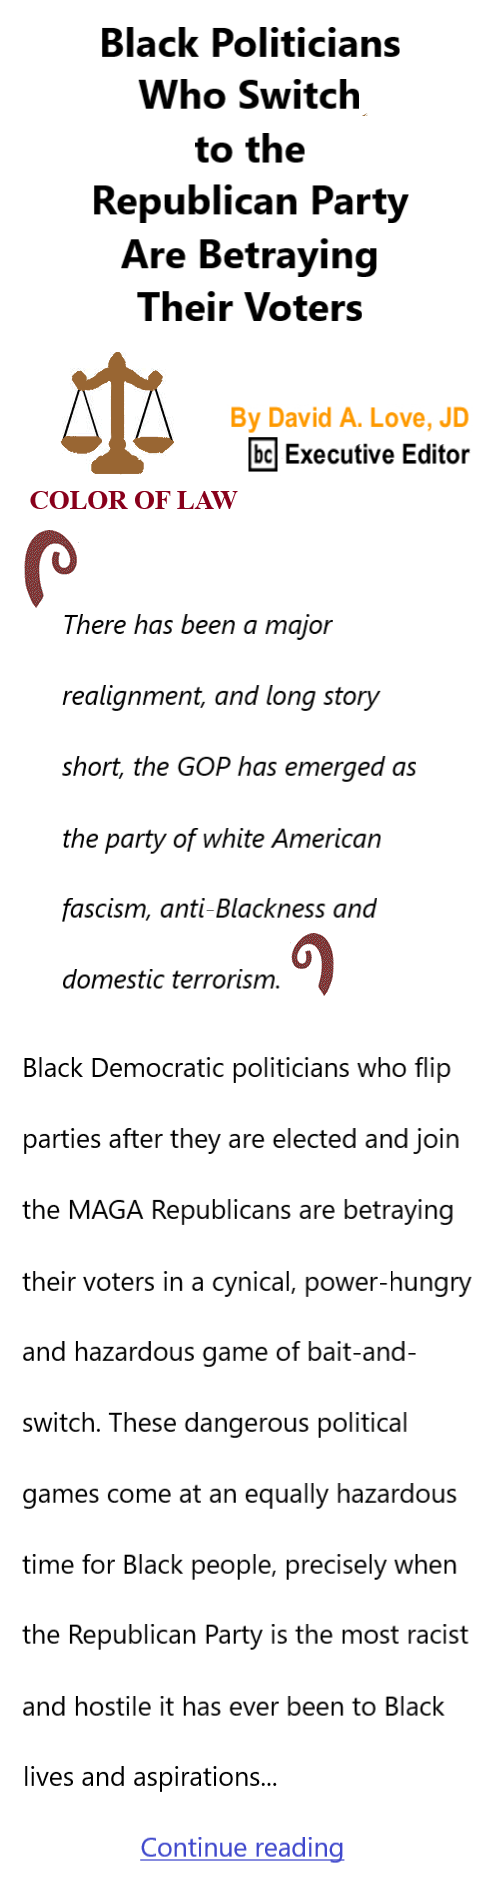 BlackCommentator.com Oct 19, 2023 - Issue 974: Black Politicians Who Switch to the Republican Party Are Betraying Their Voters - Color of Law By David A. Love, JD, BC Executive Editor